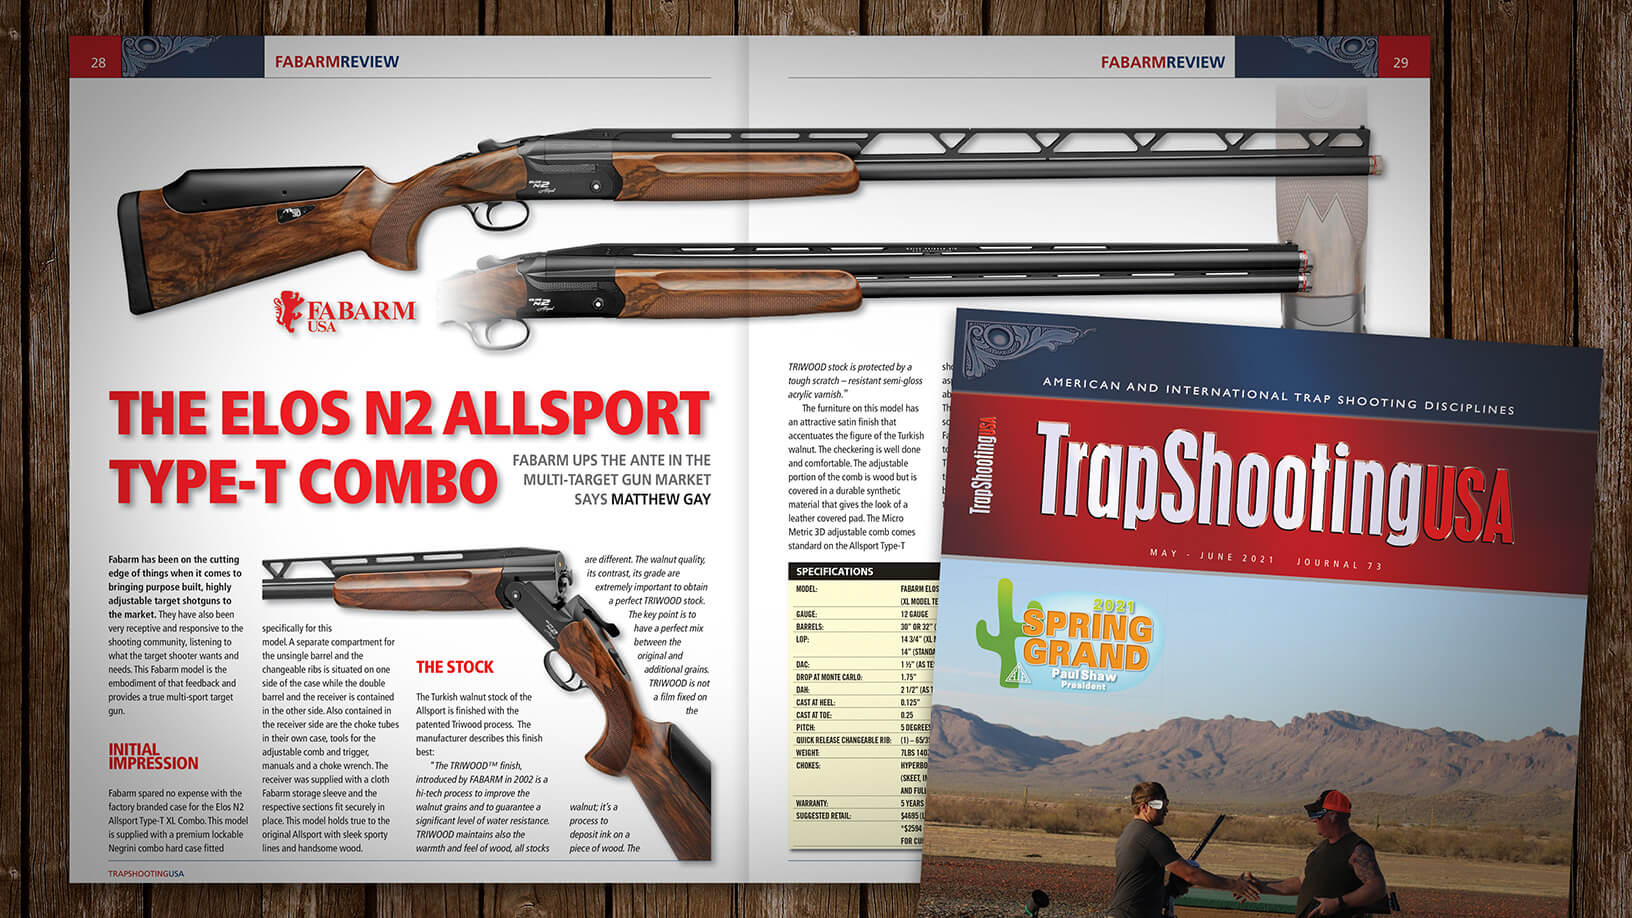 [Trap Shooting USA: 05:21] Review: Fabarm Elos N2 Allsport Type-T Combo